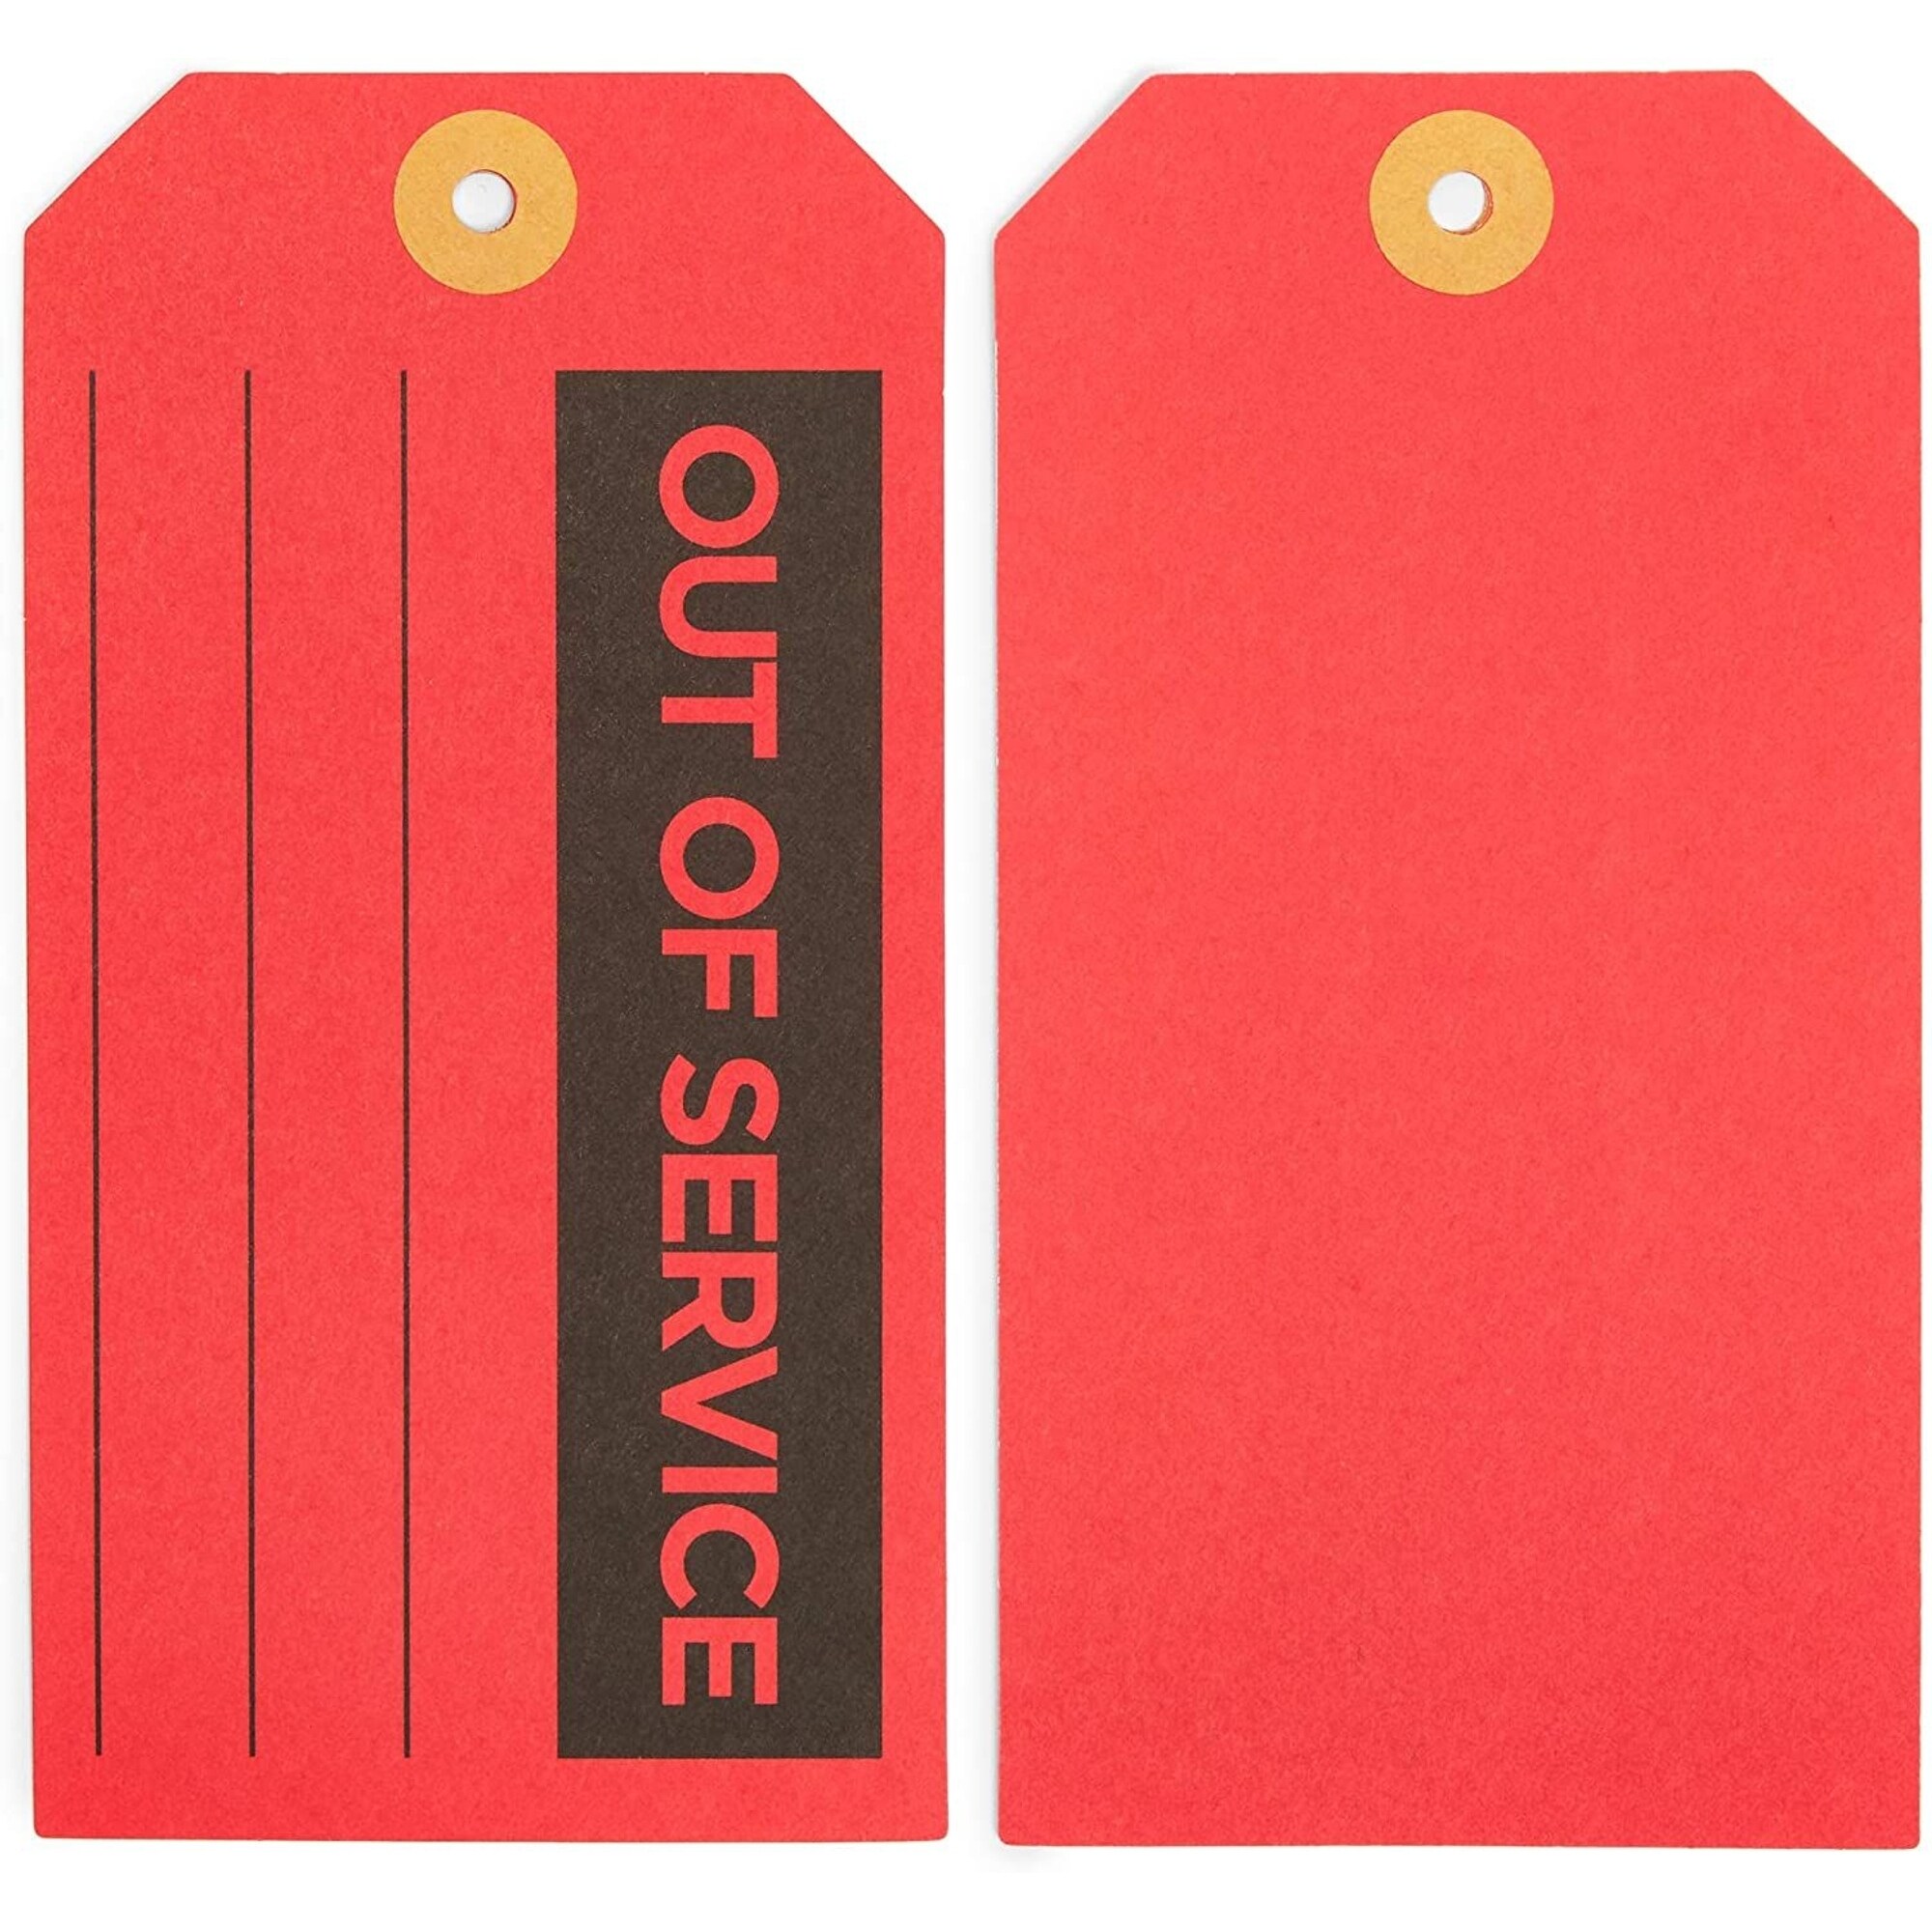 Juvale 100 Pack Red Out of Service Tags with String, Bulk Set Maintenance Equipment Repair Signs for Small Business Supplies (5.75 x 3 in)